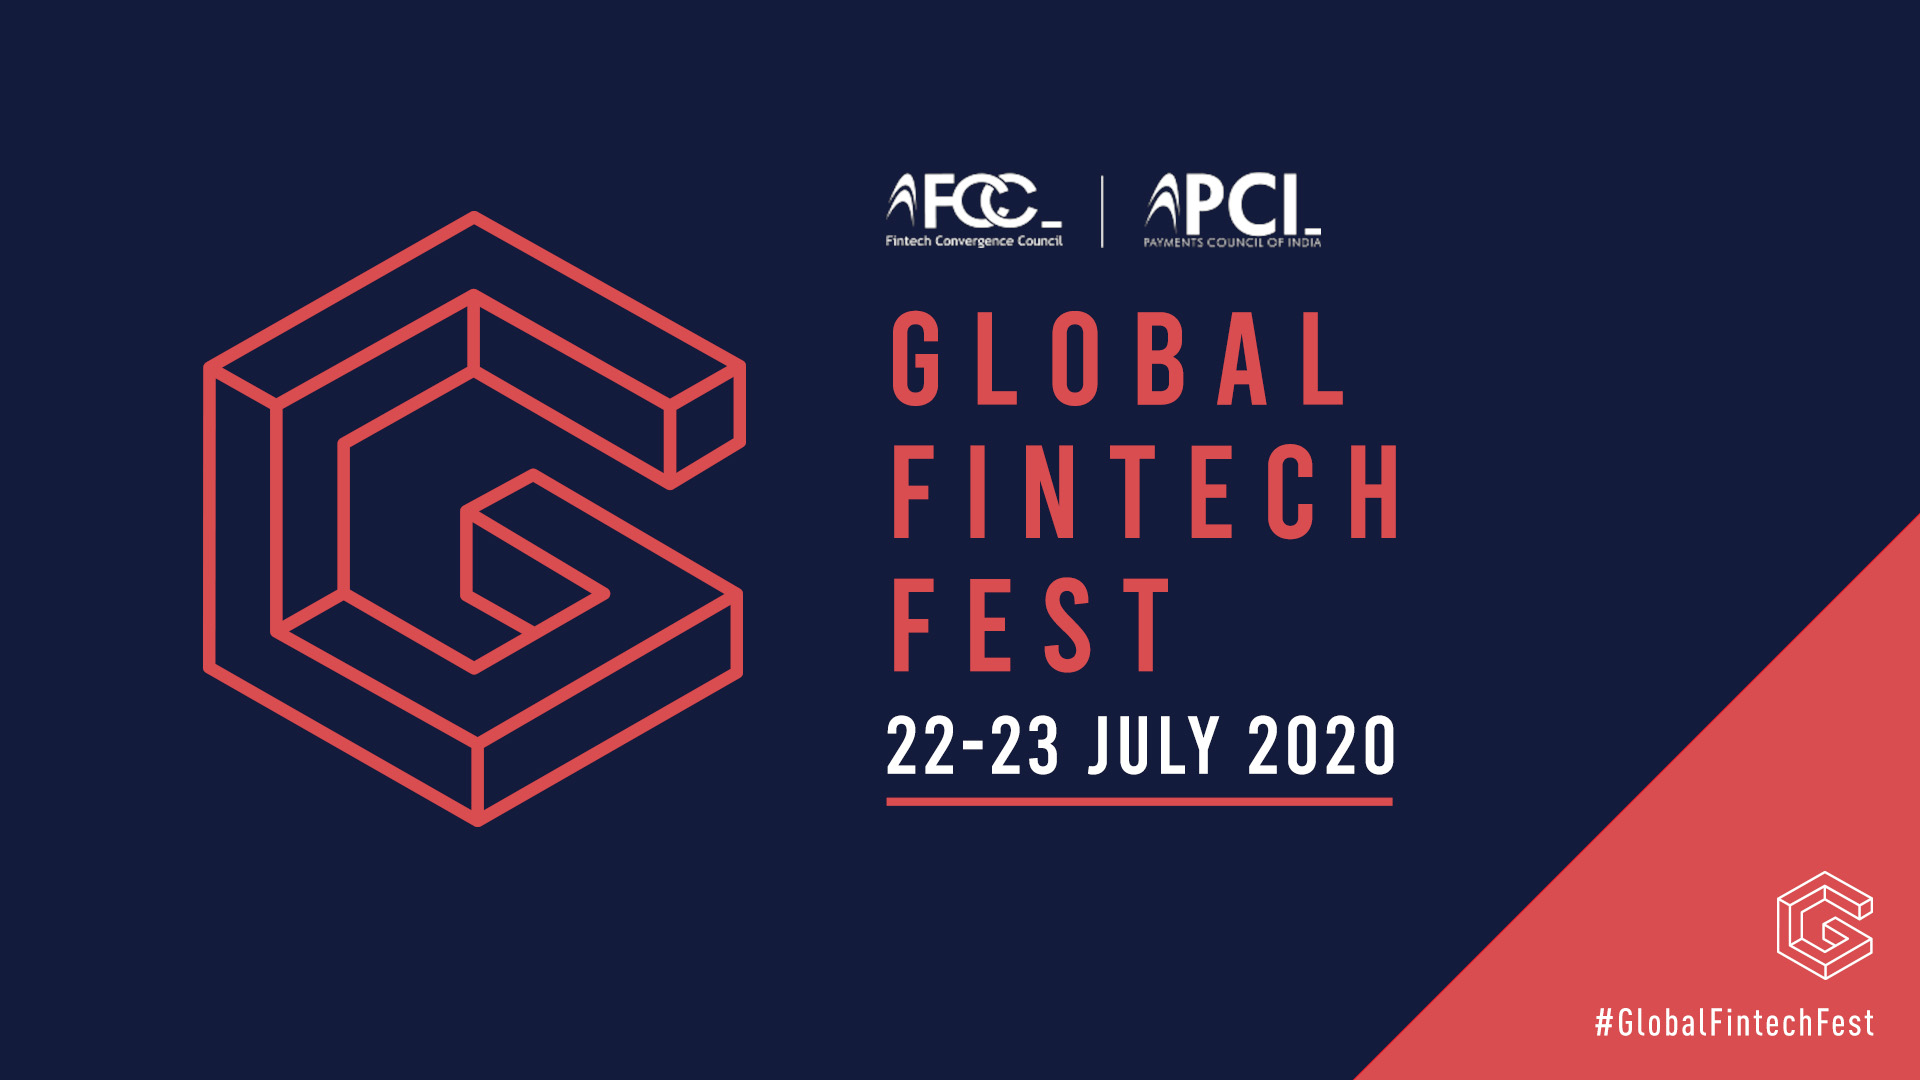 Global FinTech Fest organized by Internet & Mobile Association of India